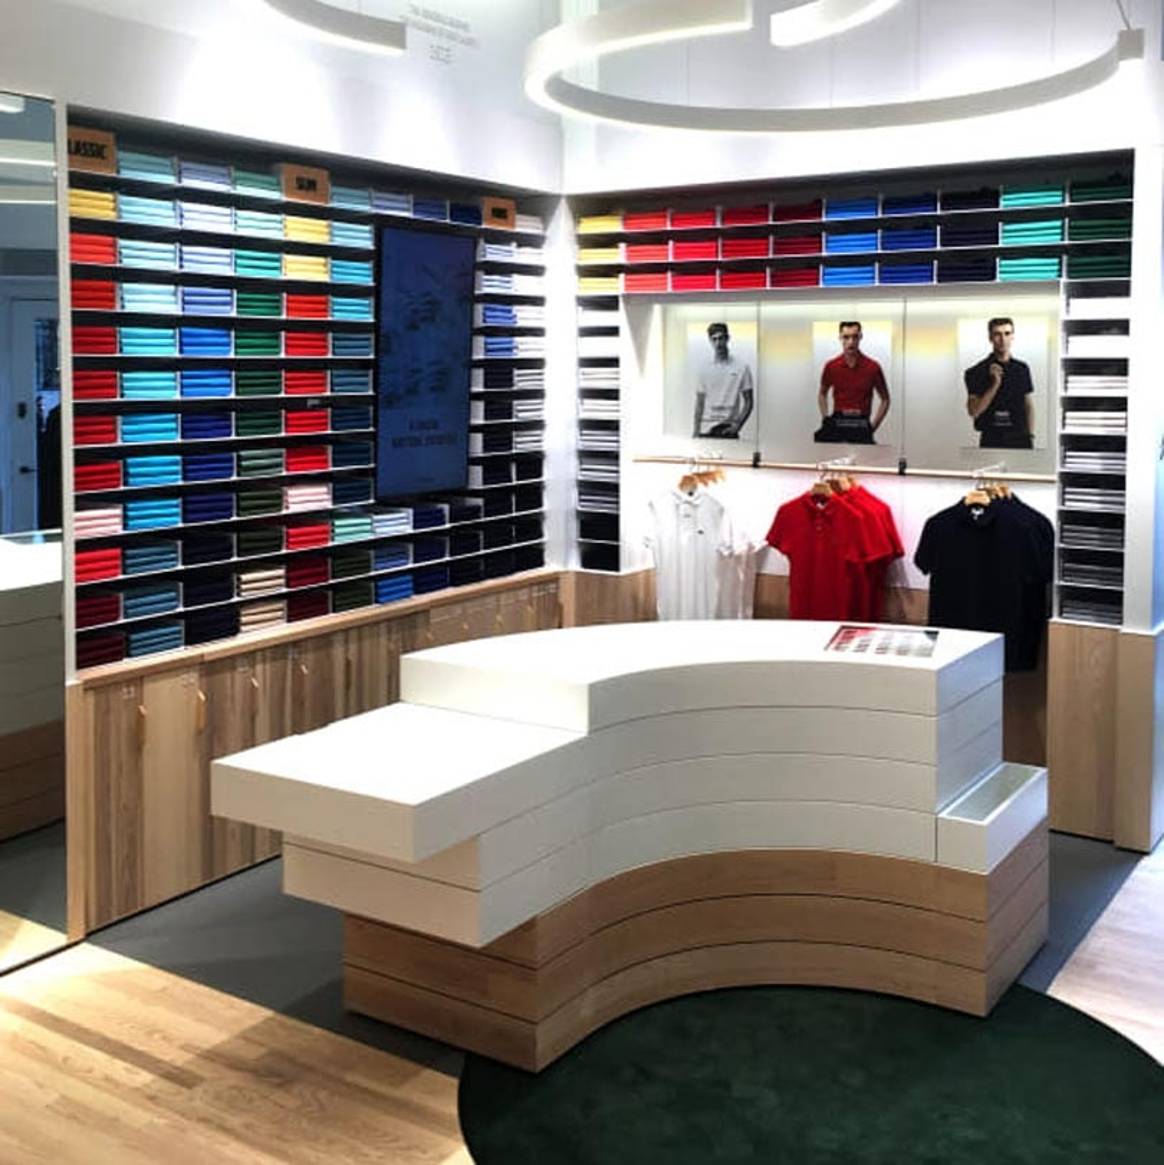 LACOSTE OPENT NIEUWE BOUTIQUE IN AMSTERDAM